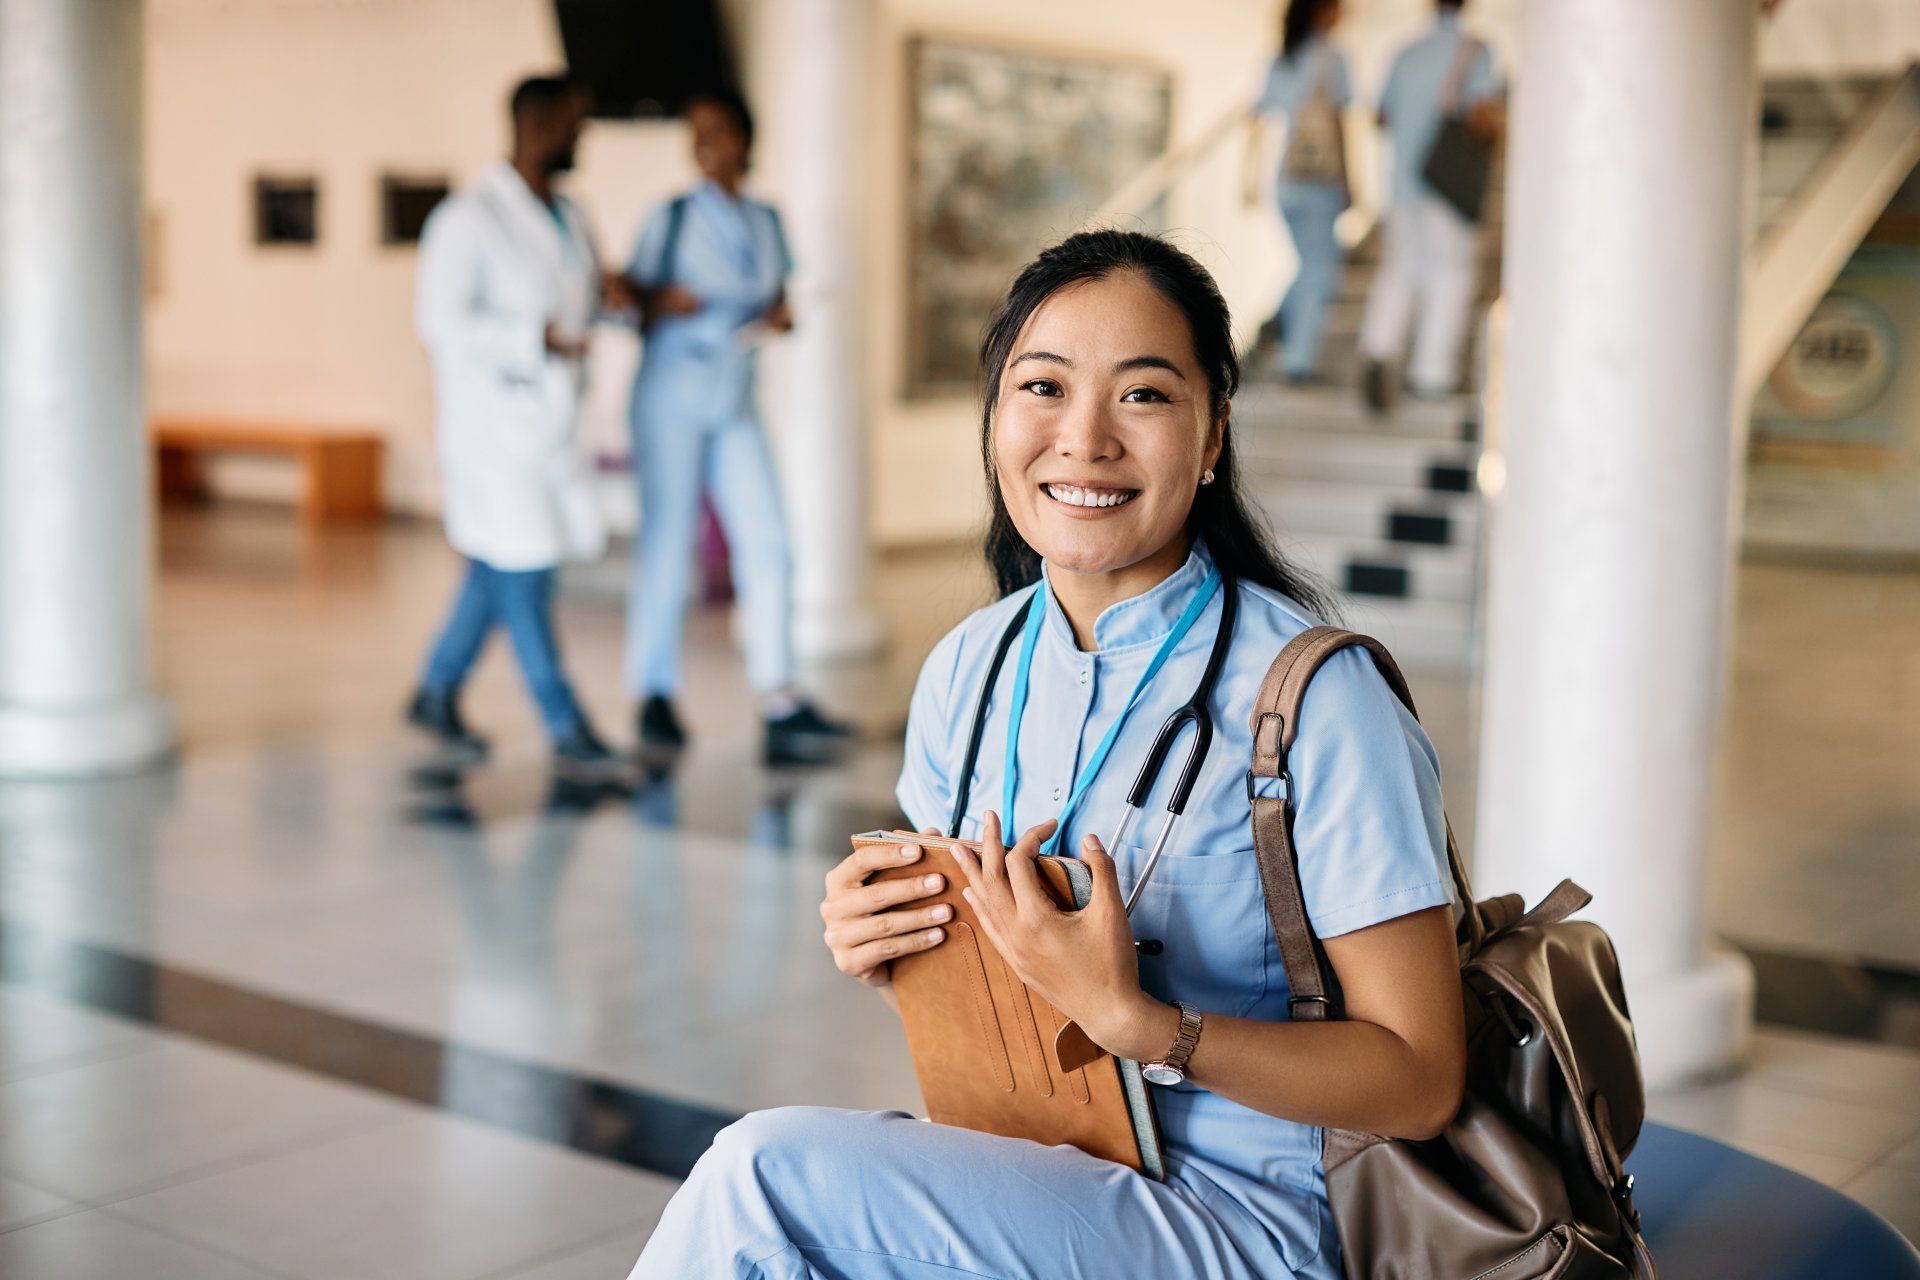 A young female nursing student smiles while sitting on a bench in the lobby of her school building.